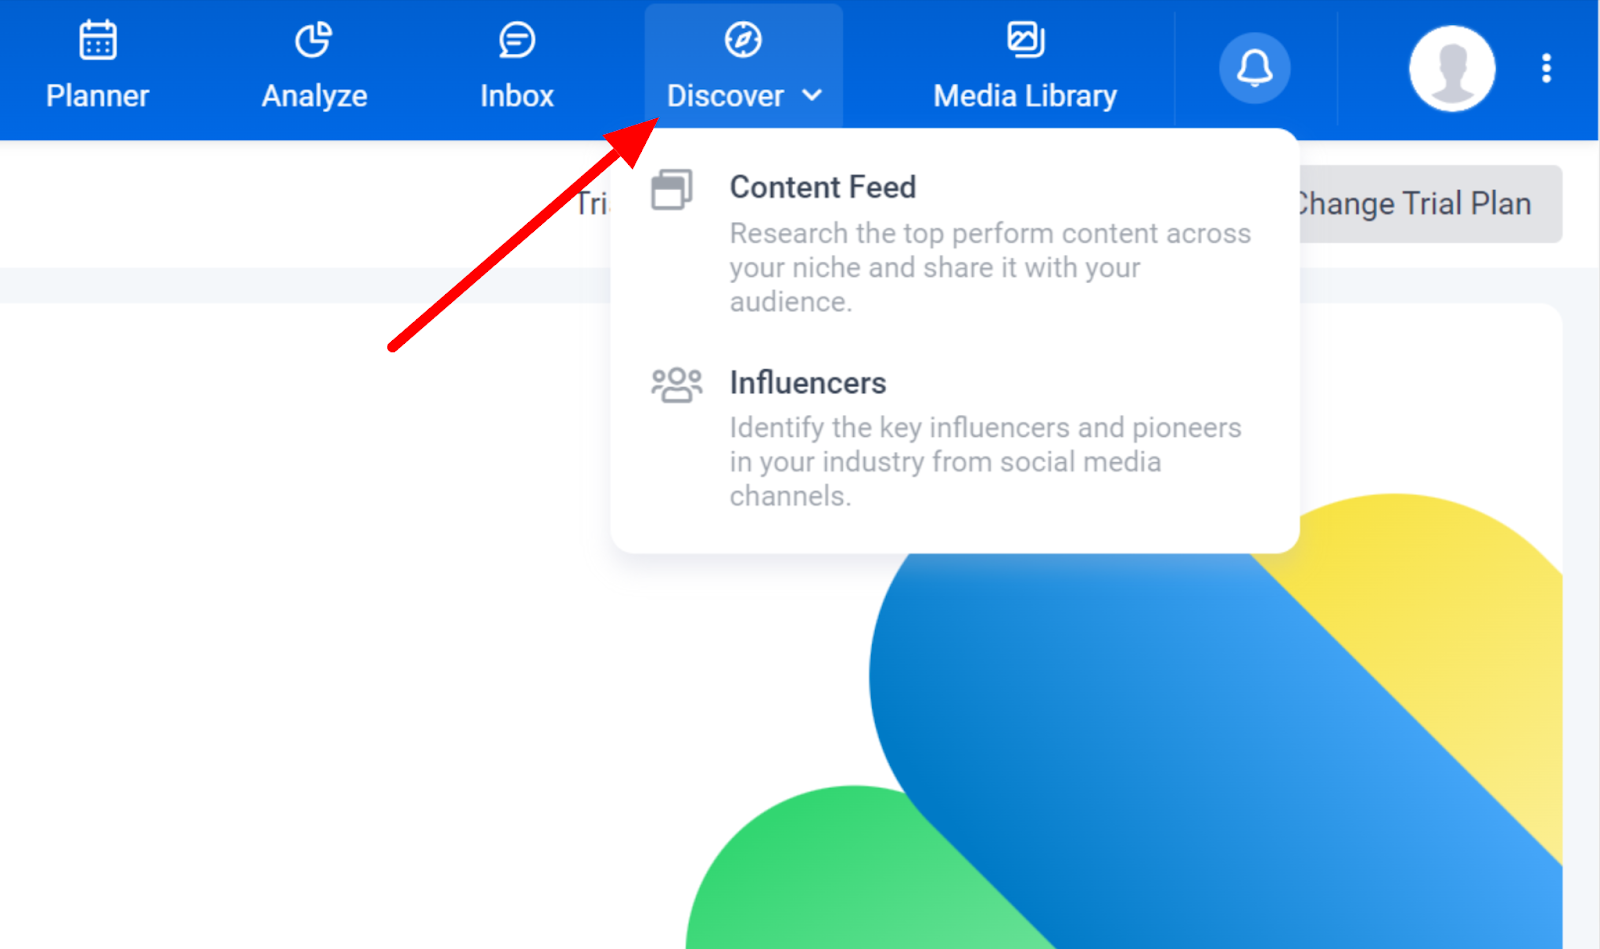 Selecting "Discover" to reveal the Content Feed and Influencers options in ContentStudio.